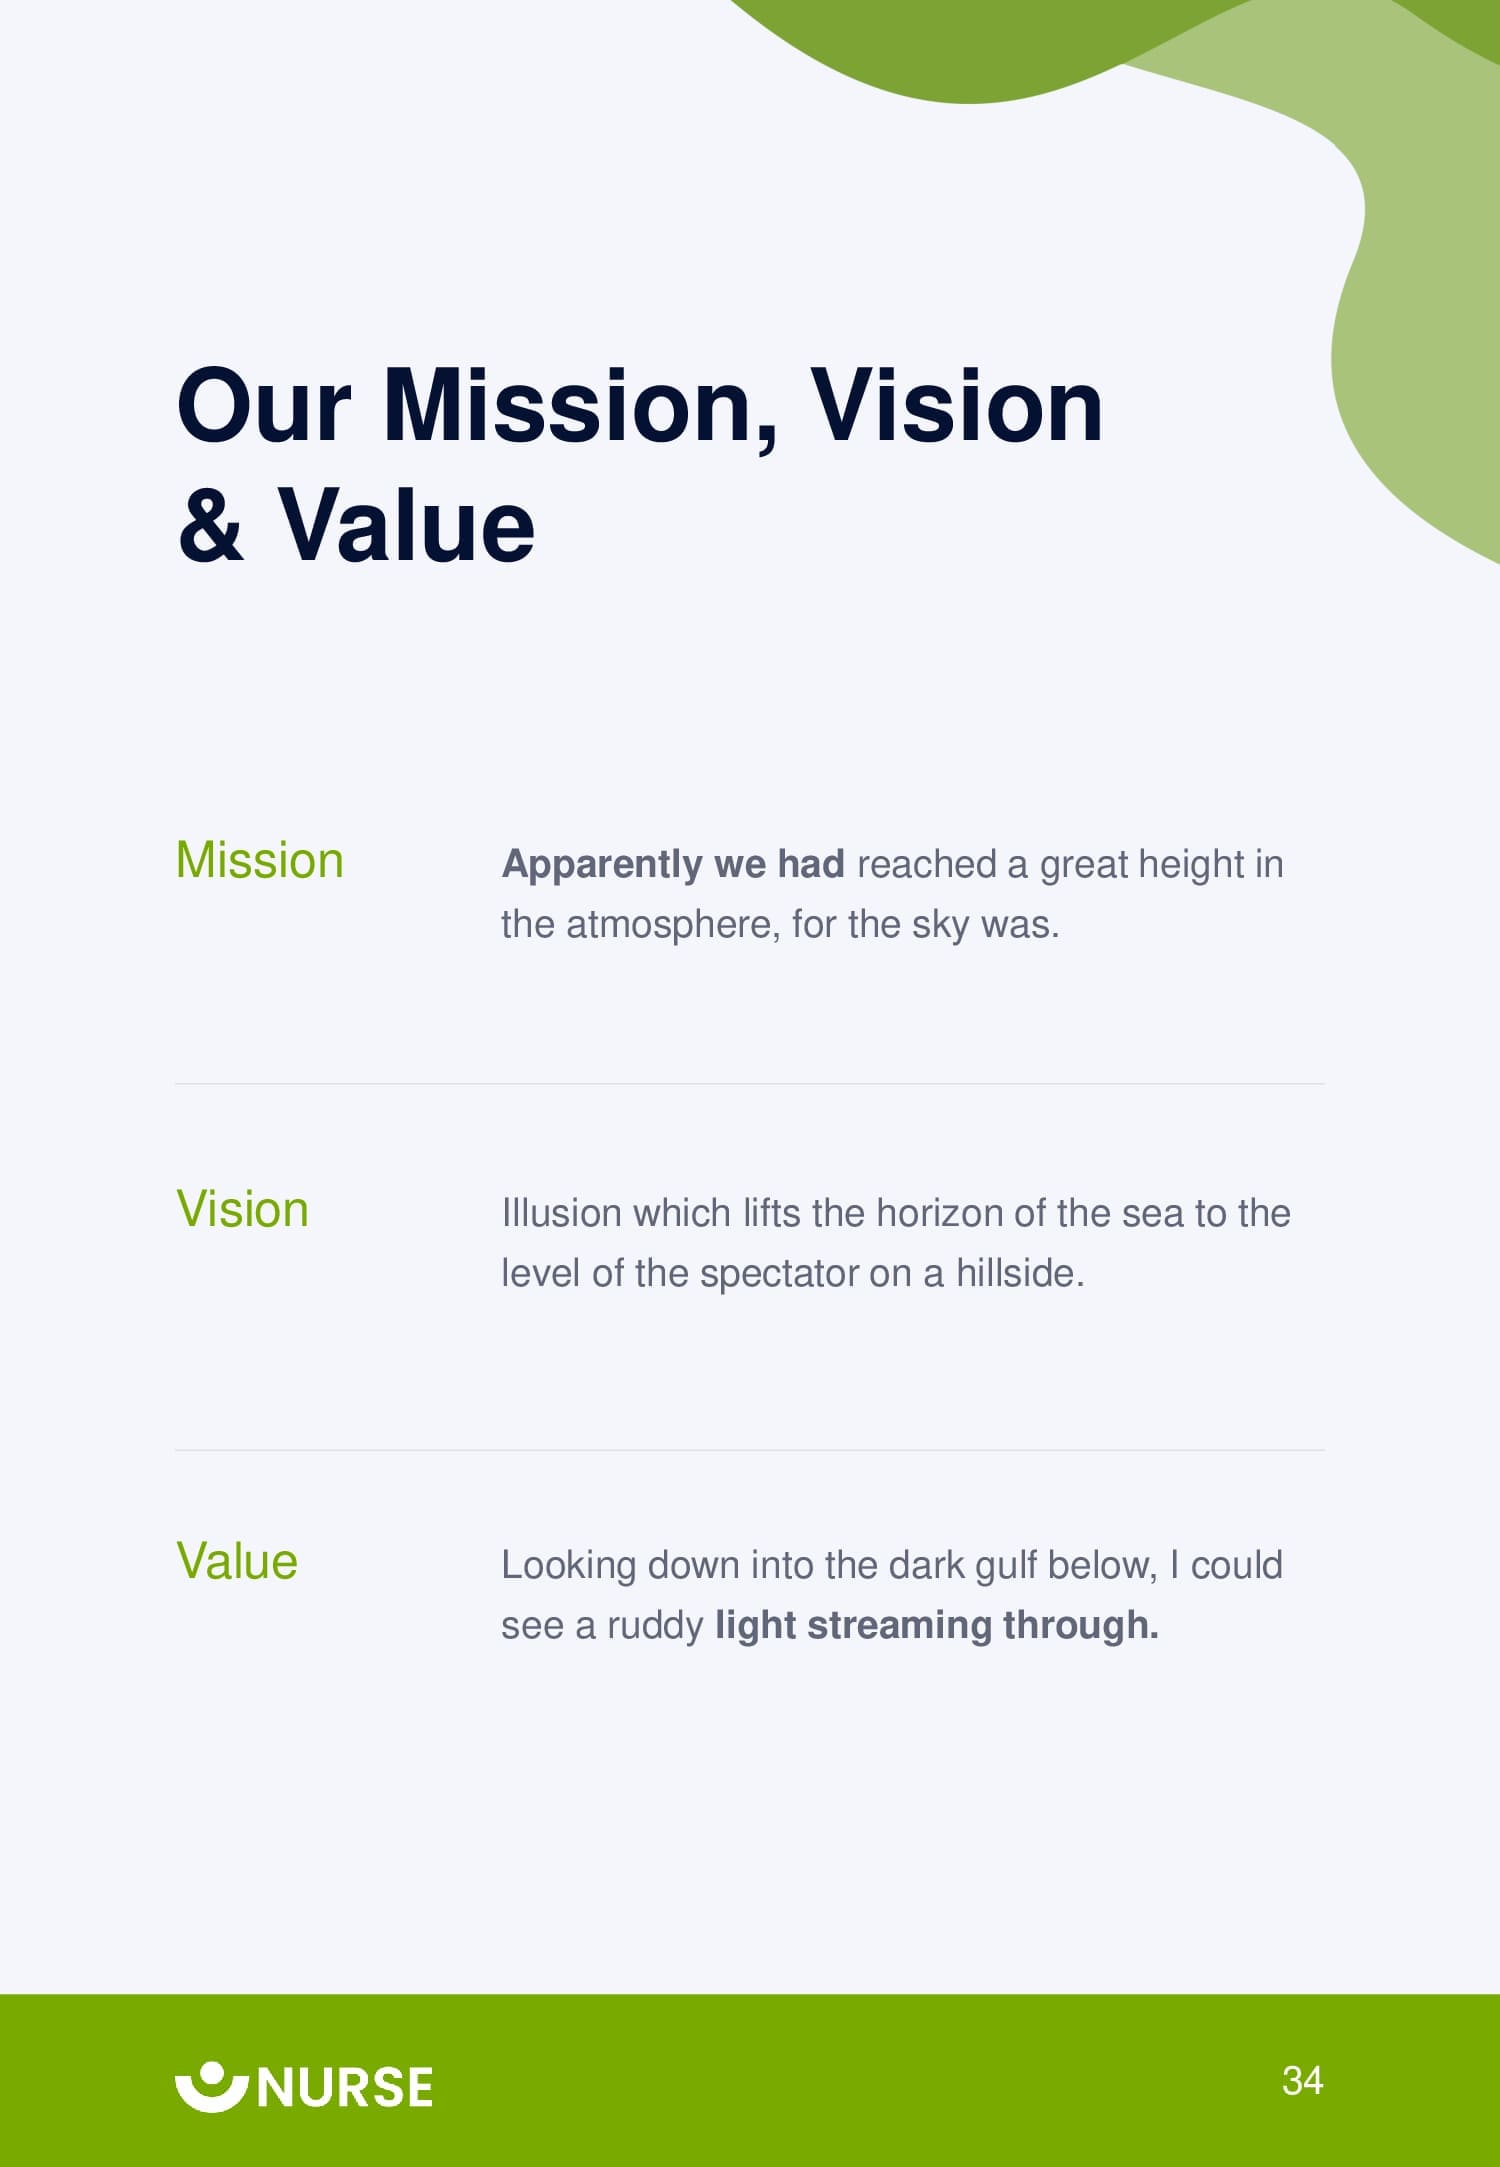 Our mission, vision and value.